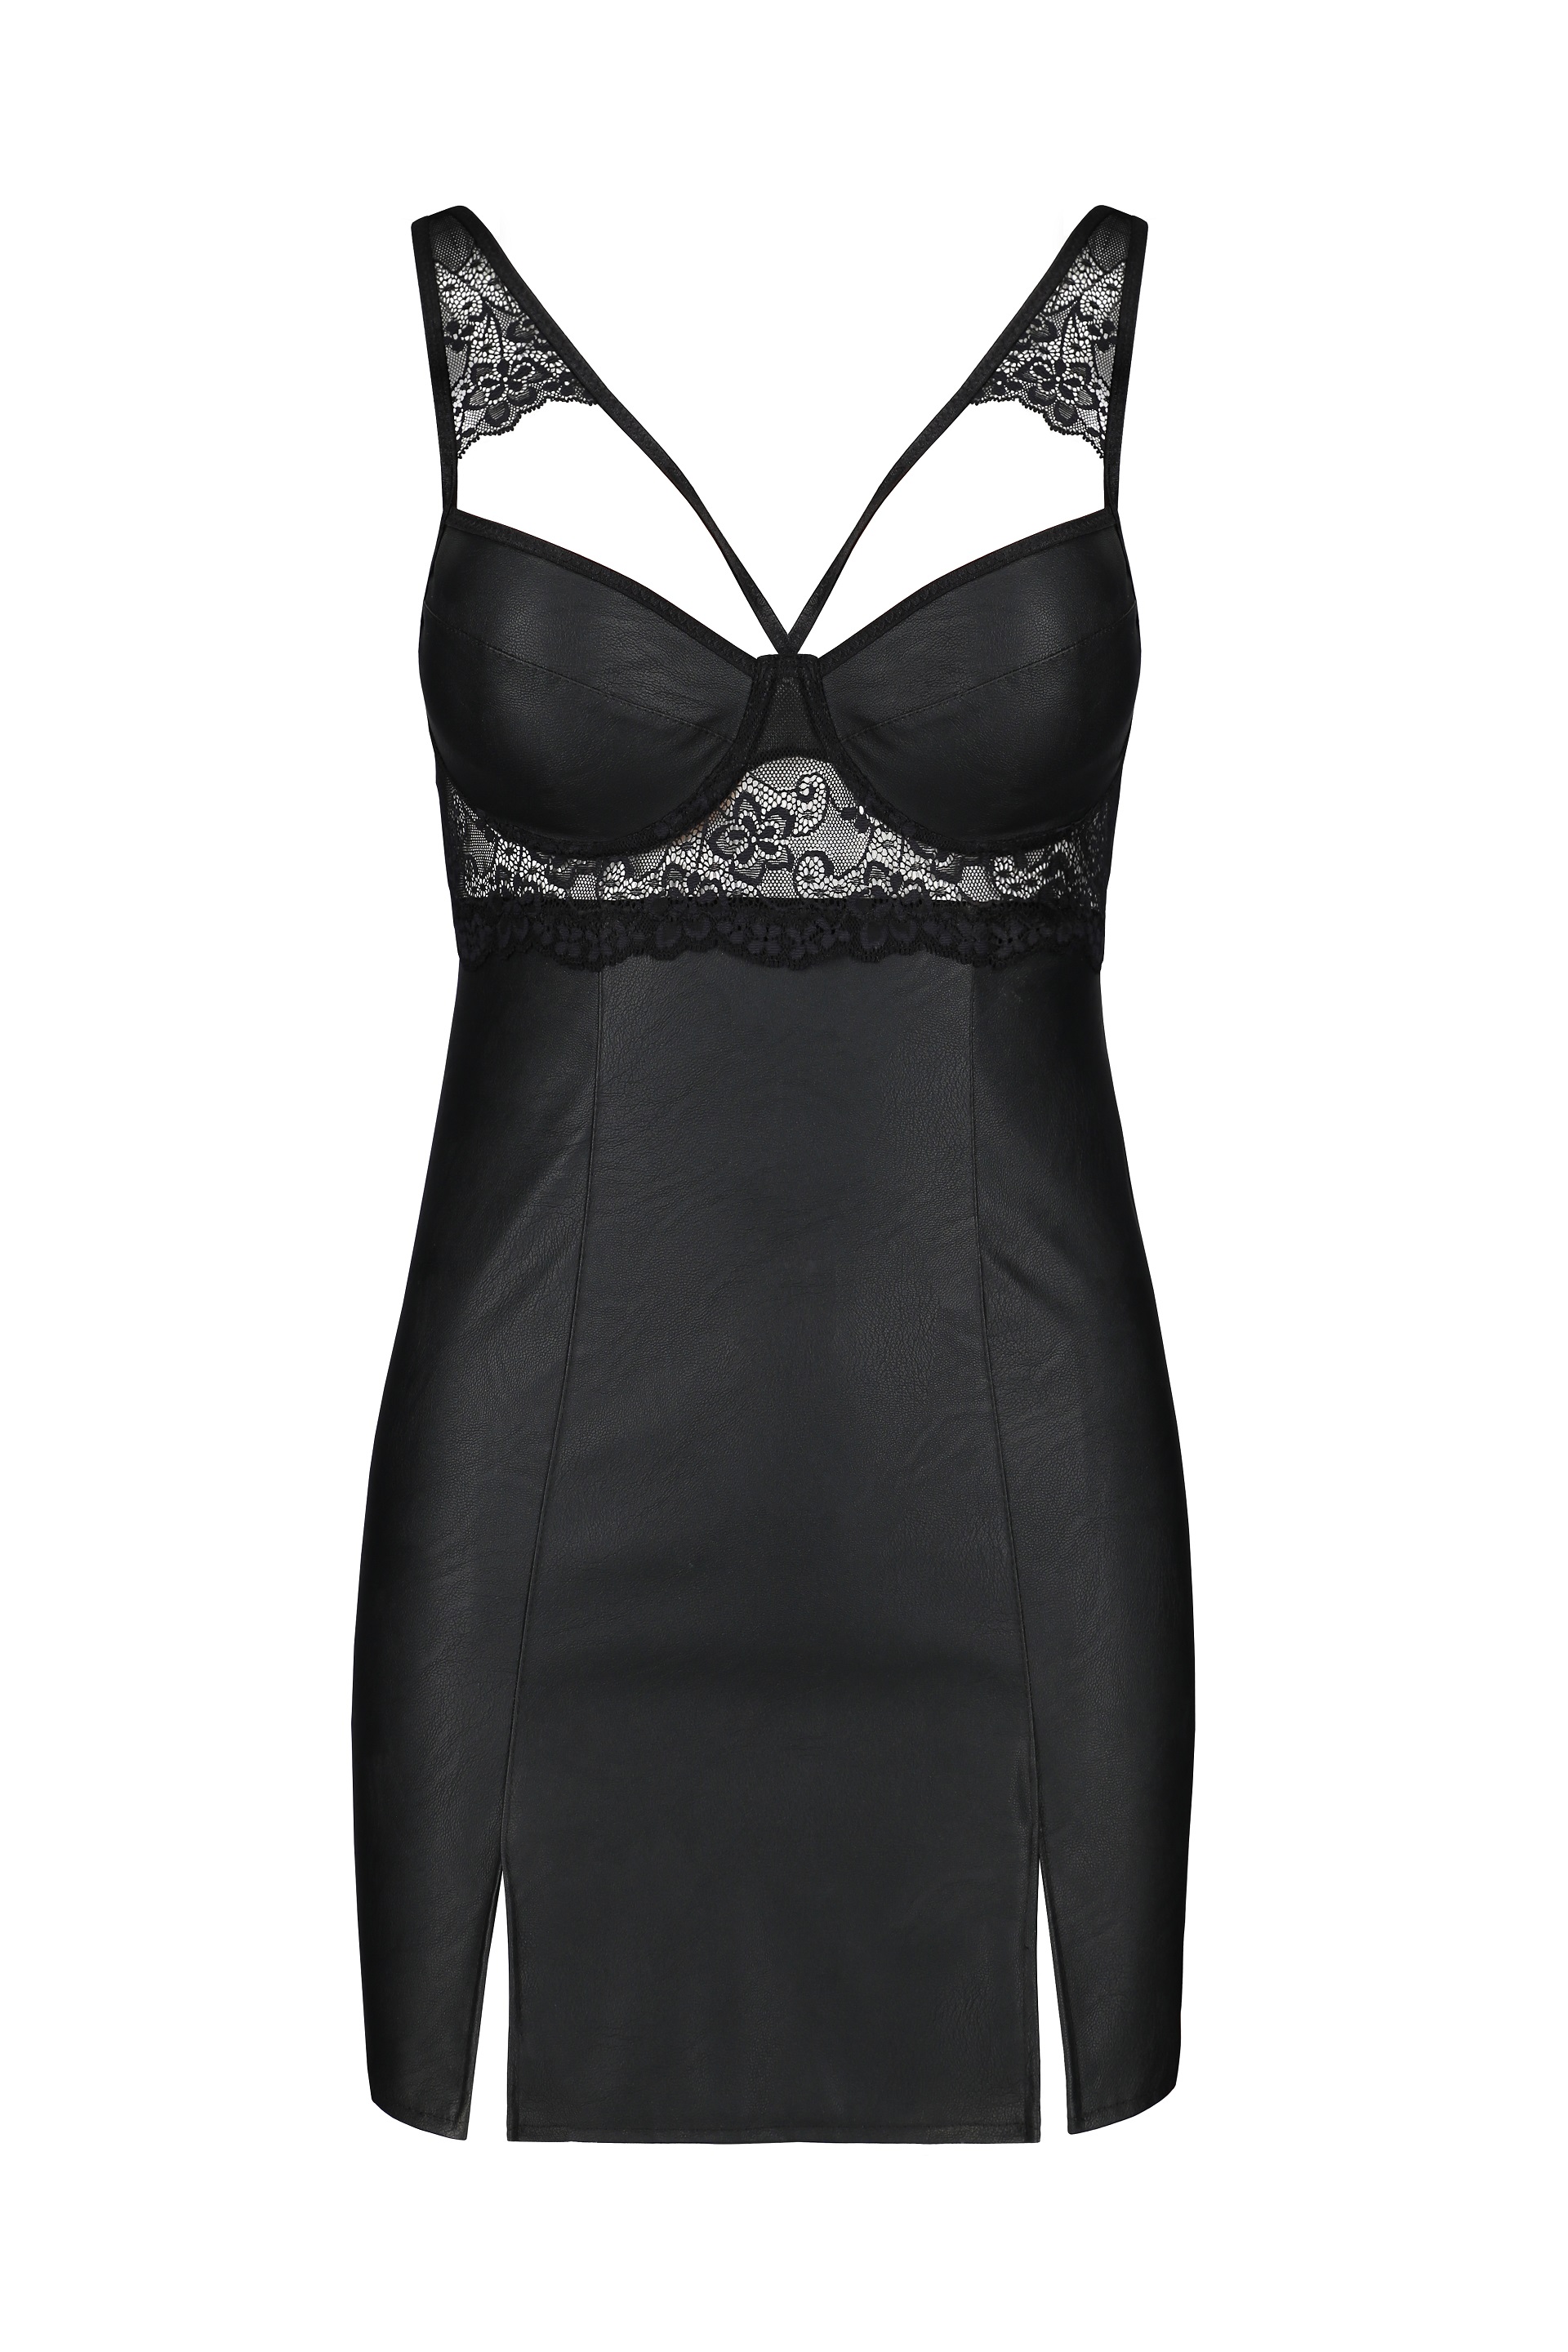 Passion - Passion Loona Chemise